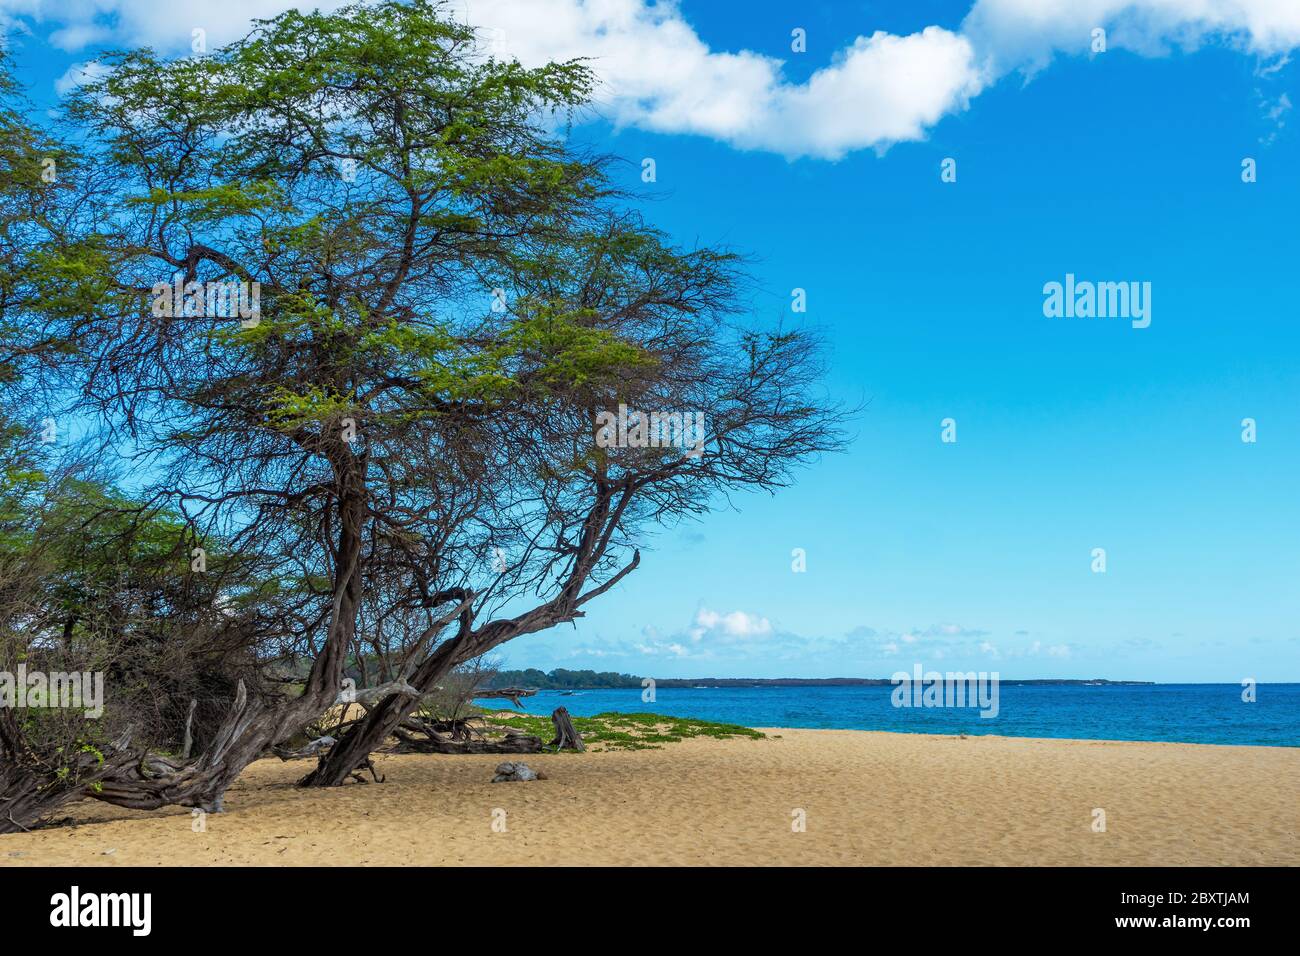 A view of Big Beach with sand and trees on the Hawaiian Island of Maui. Stock Photo